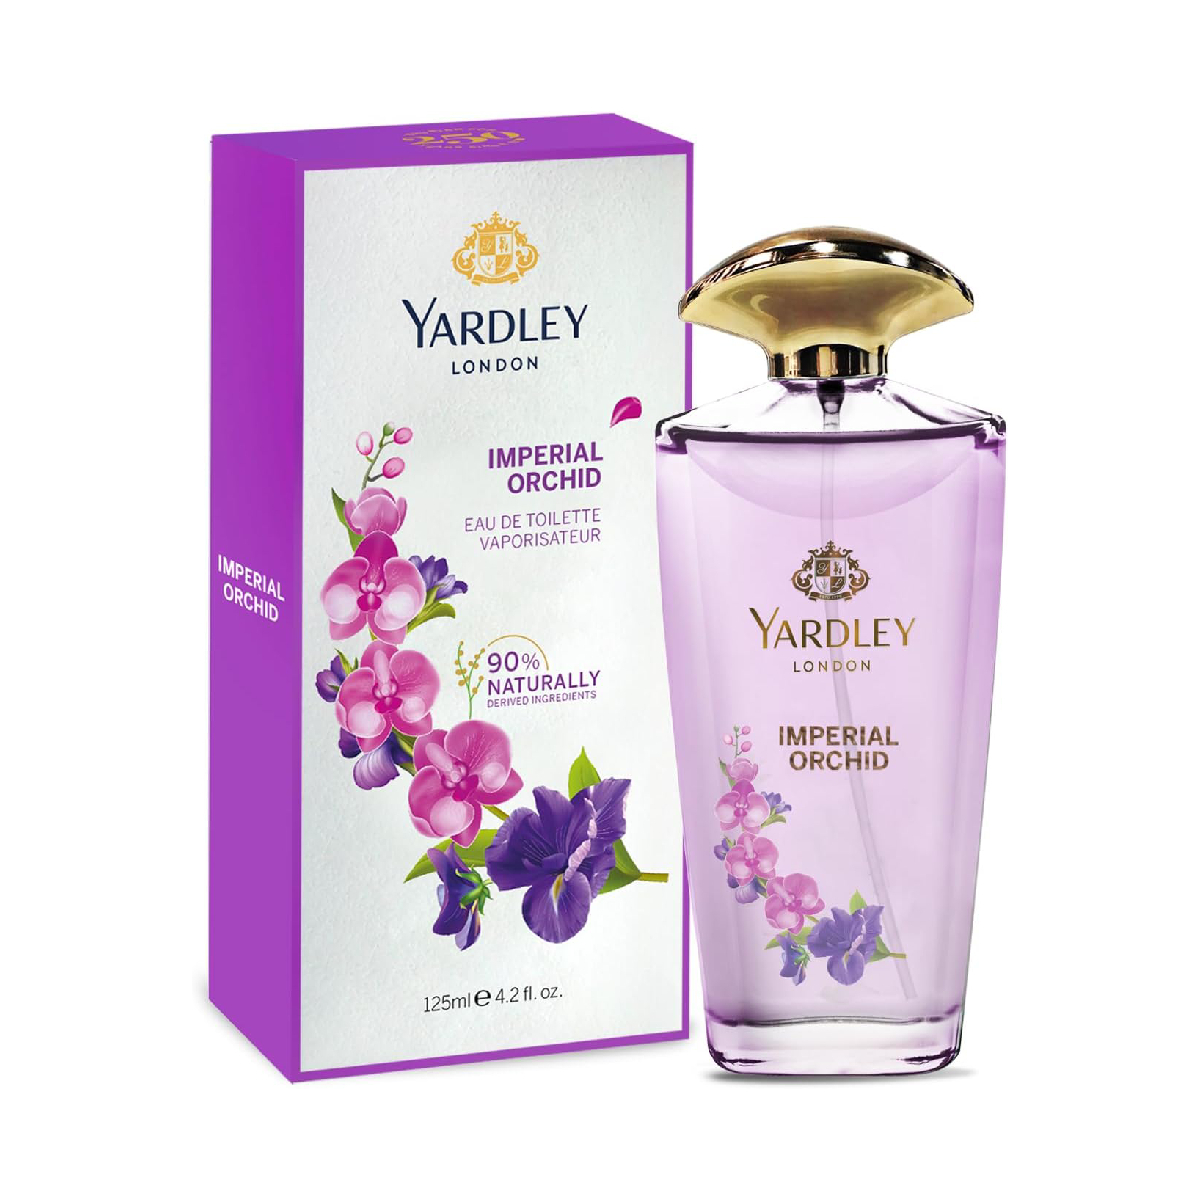 Yardley EDT Imperial Orchid 125 ml